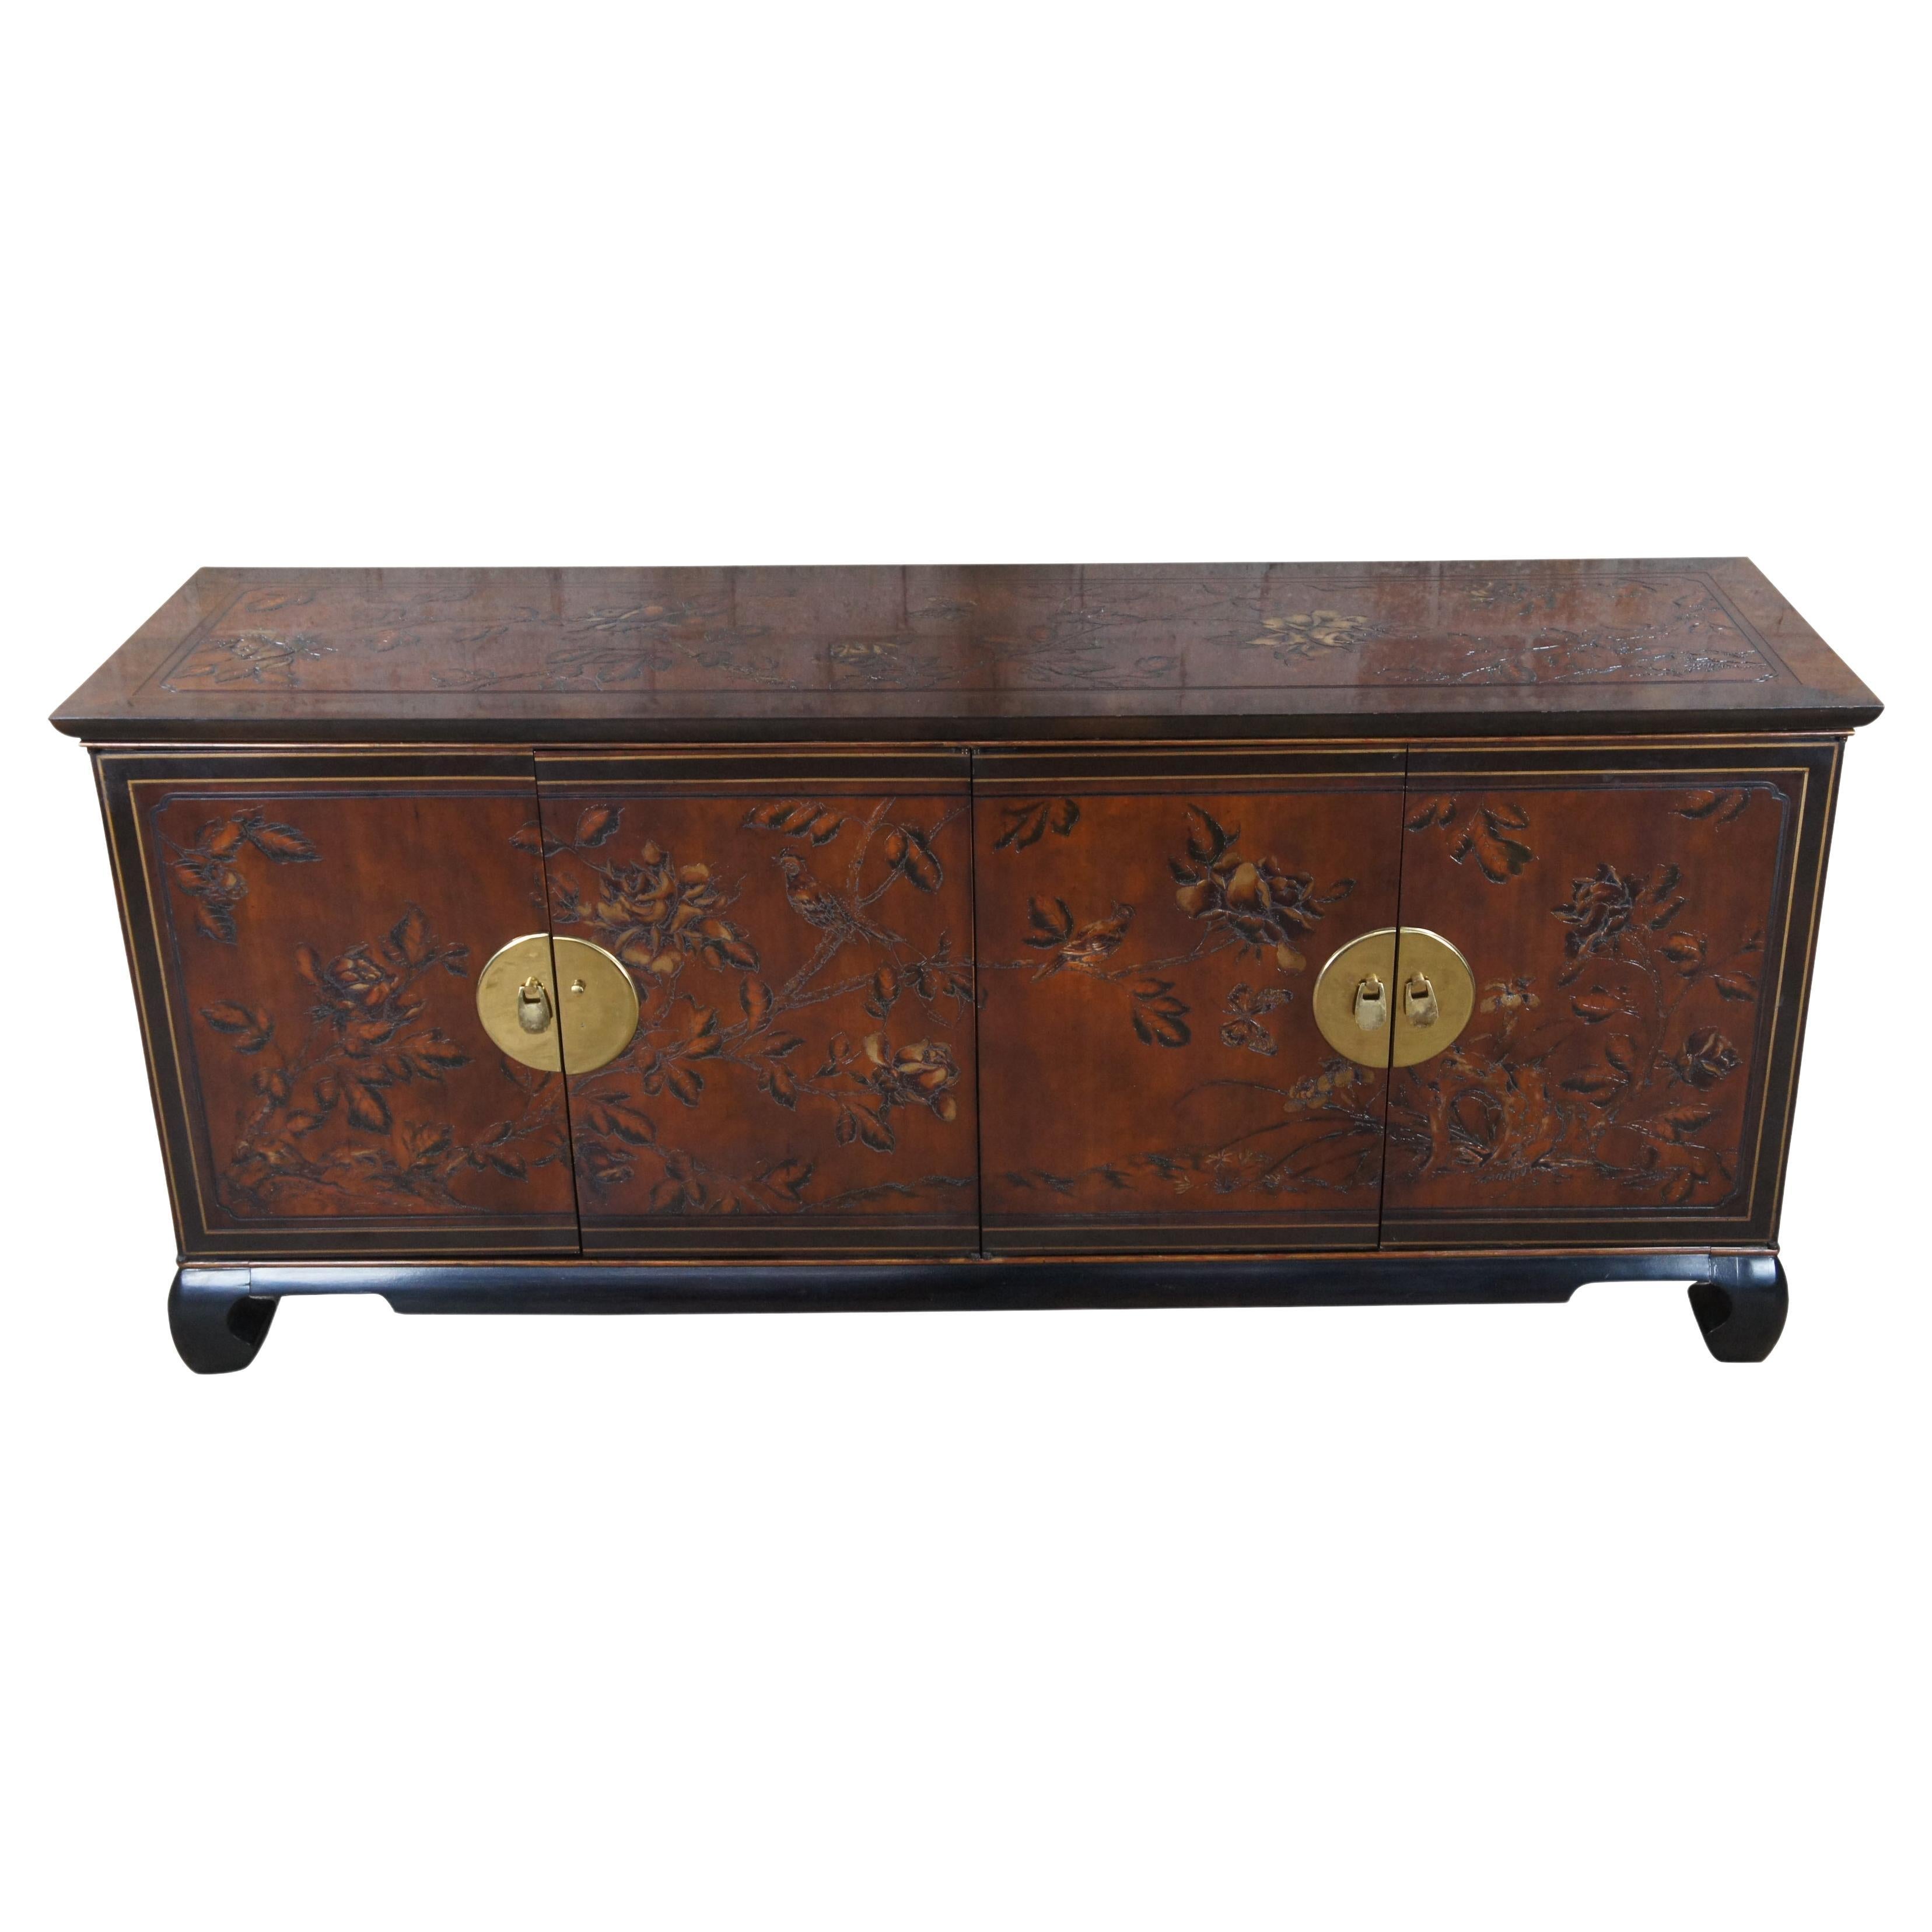 Drexel Heritage Mahogany Chinoiserie Connoisseur Sideboard Buffet Credenza 68"